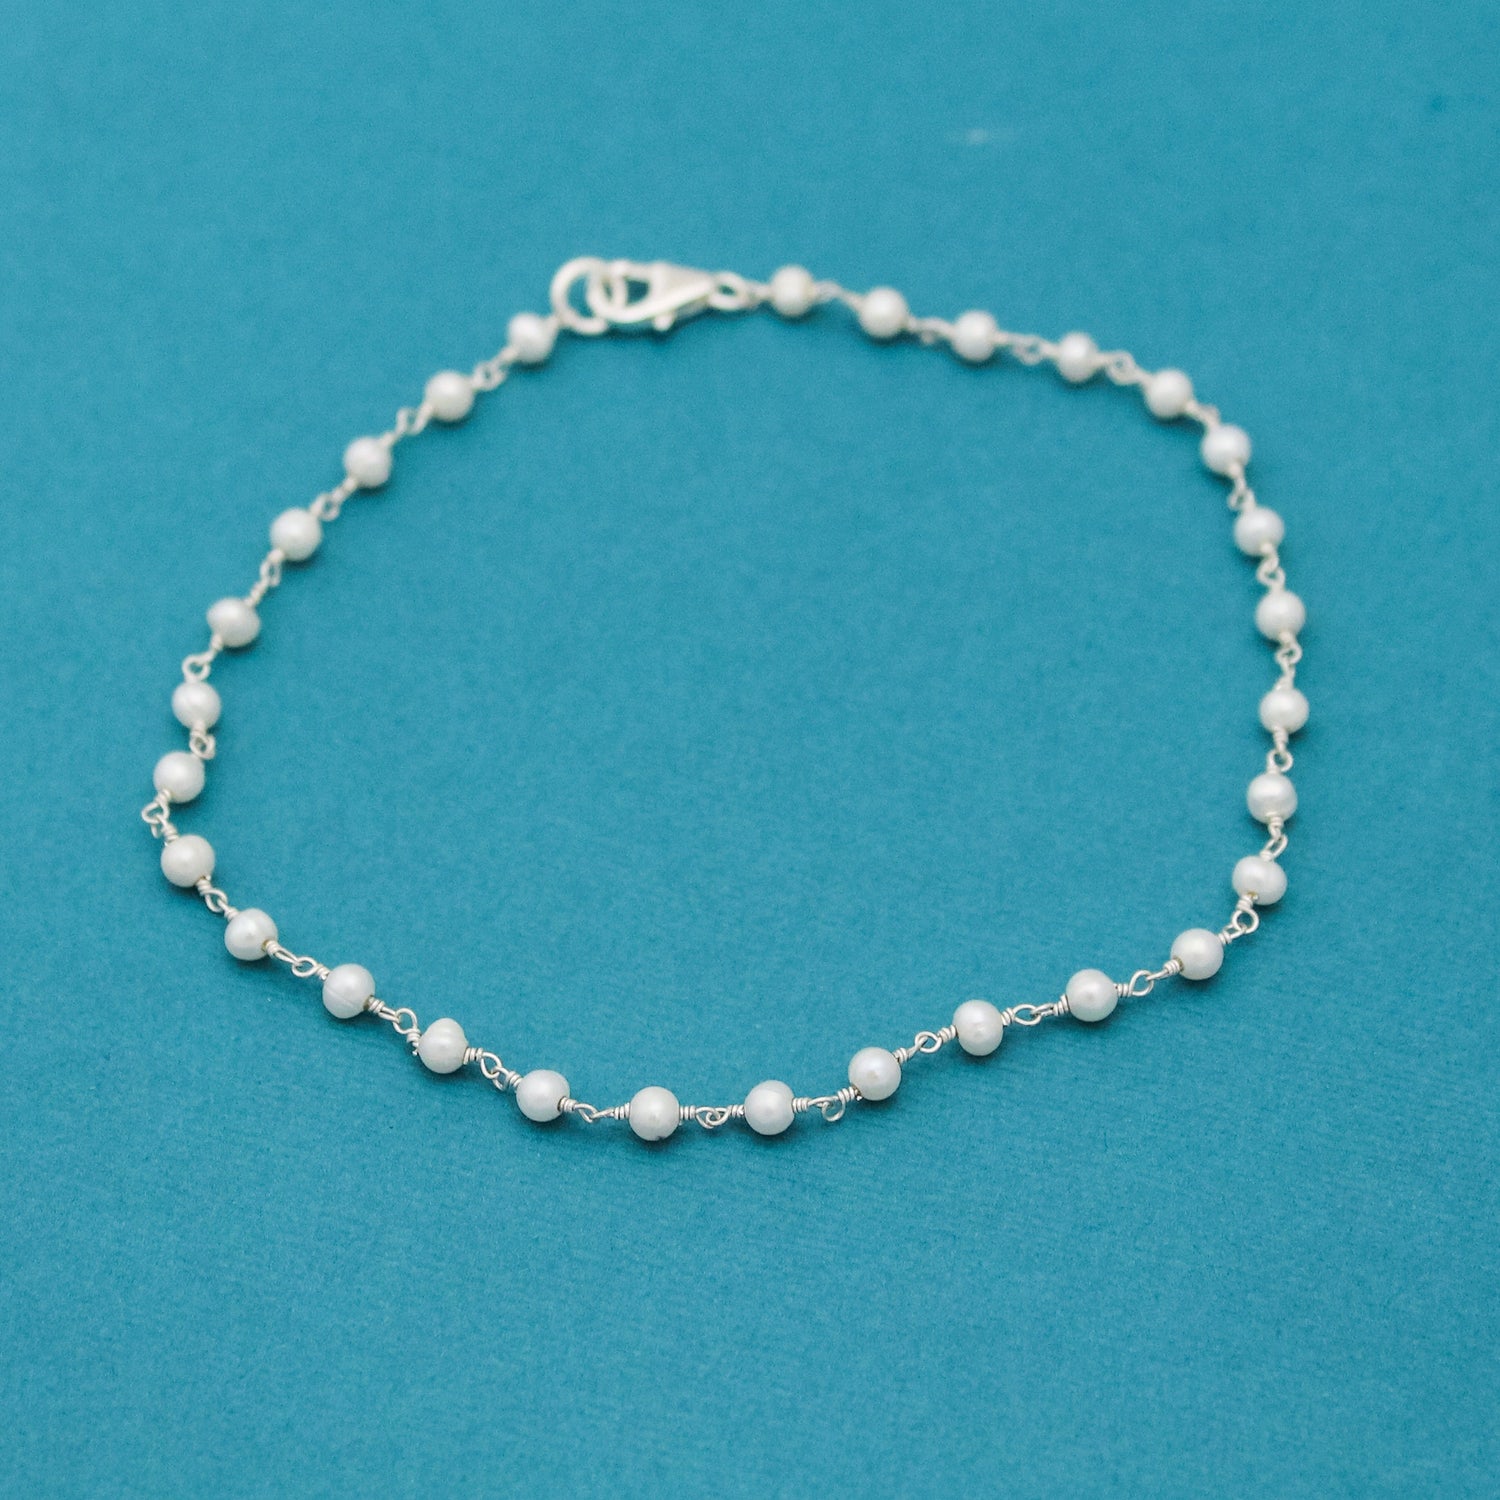 Pearl Chain Anklet, June Birthday Gift, Birthstone Jewelry, Pearl Jewelry, Sterling Silver Anklet, Gifts for Her, Summer Cruise Jewelry